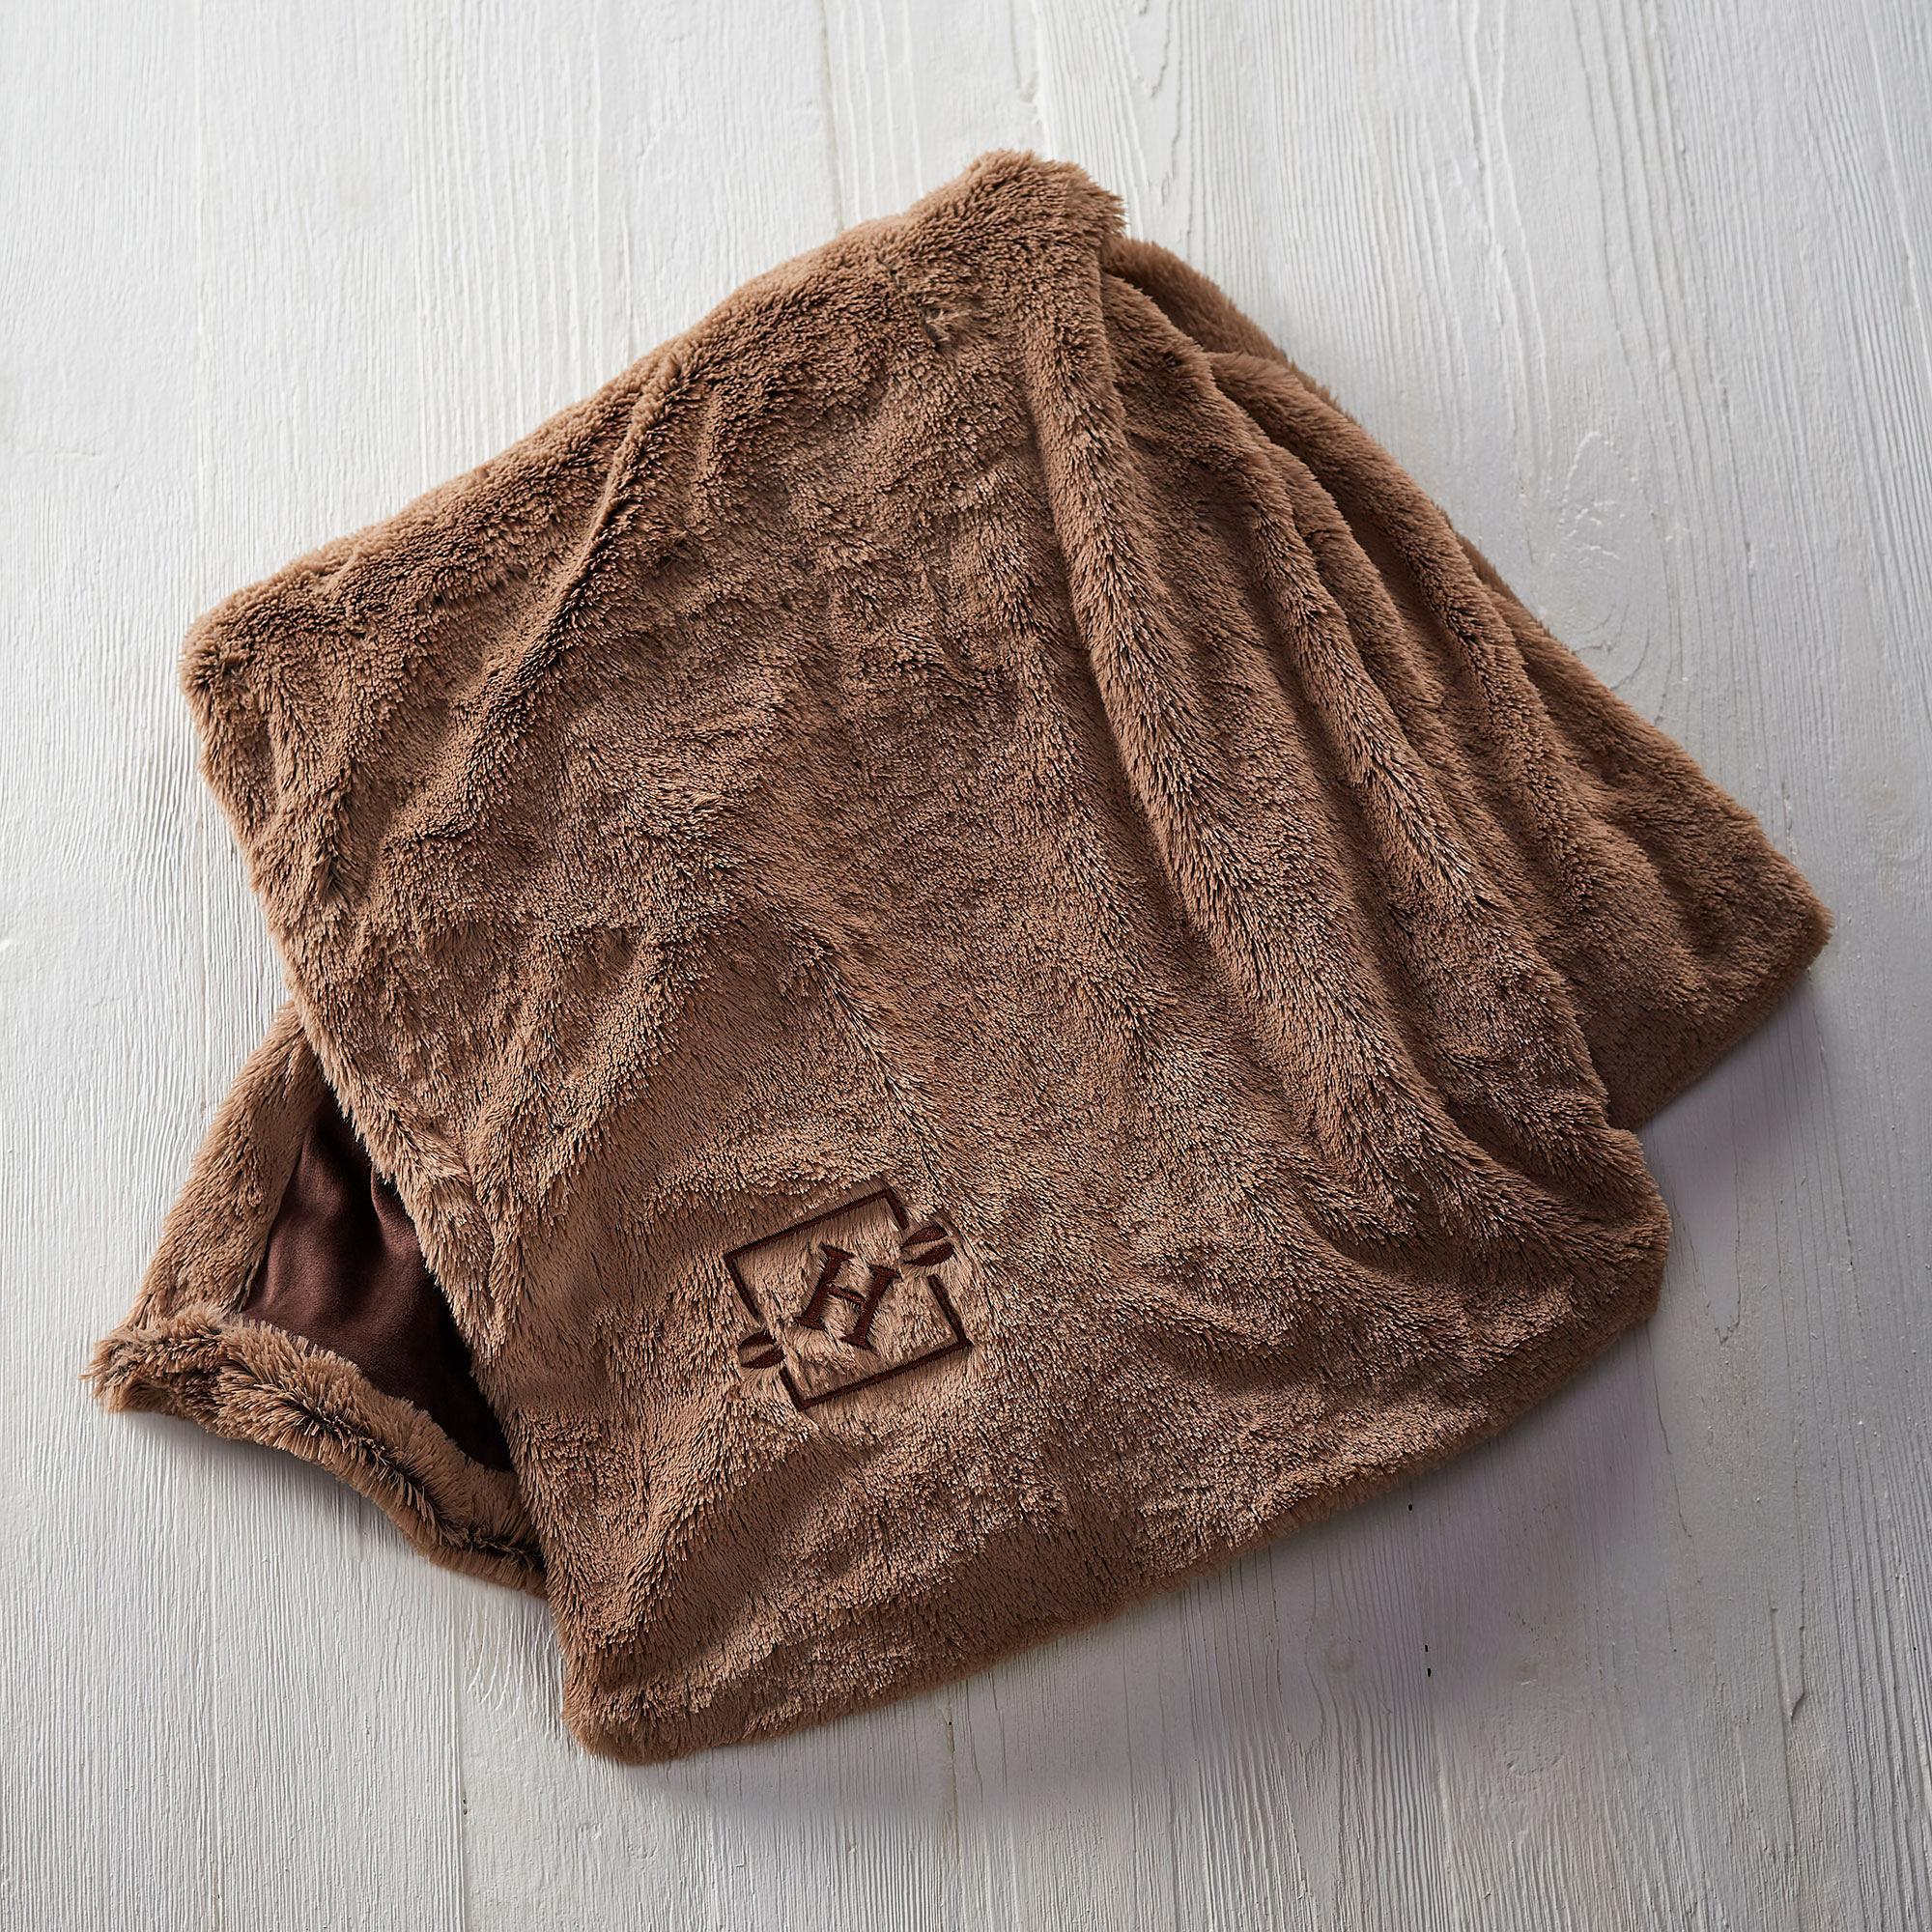 Lodge Tracks Personalized Throw Blanket - Wild Wings